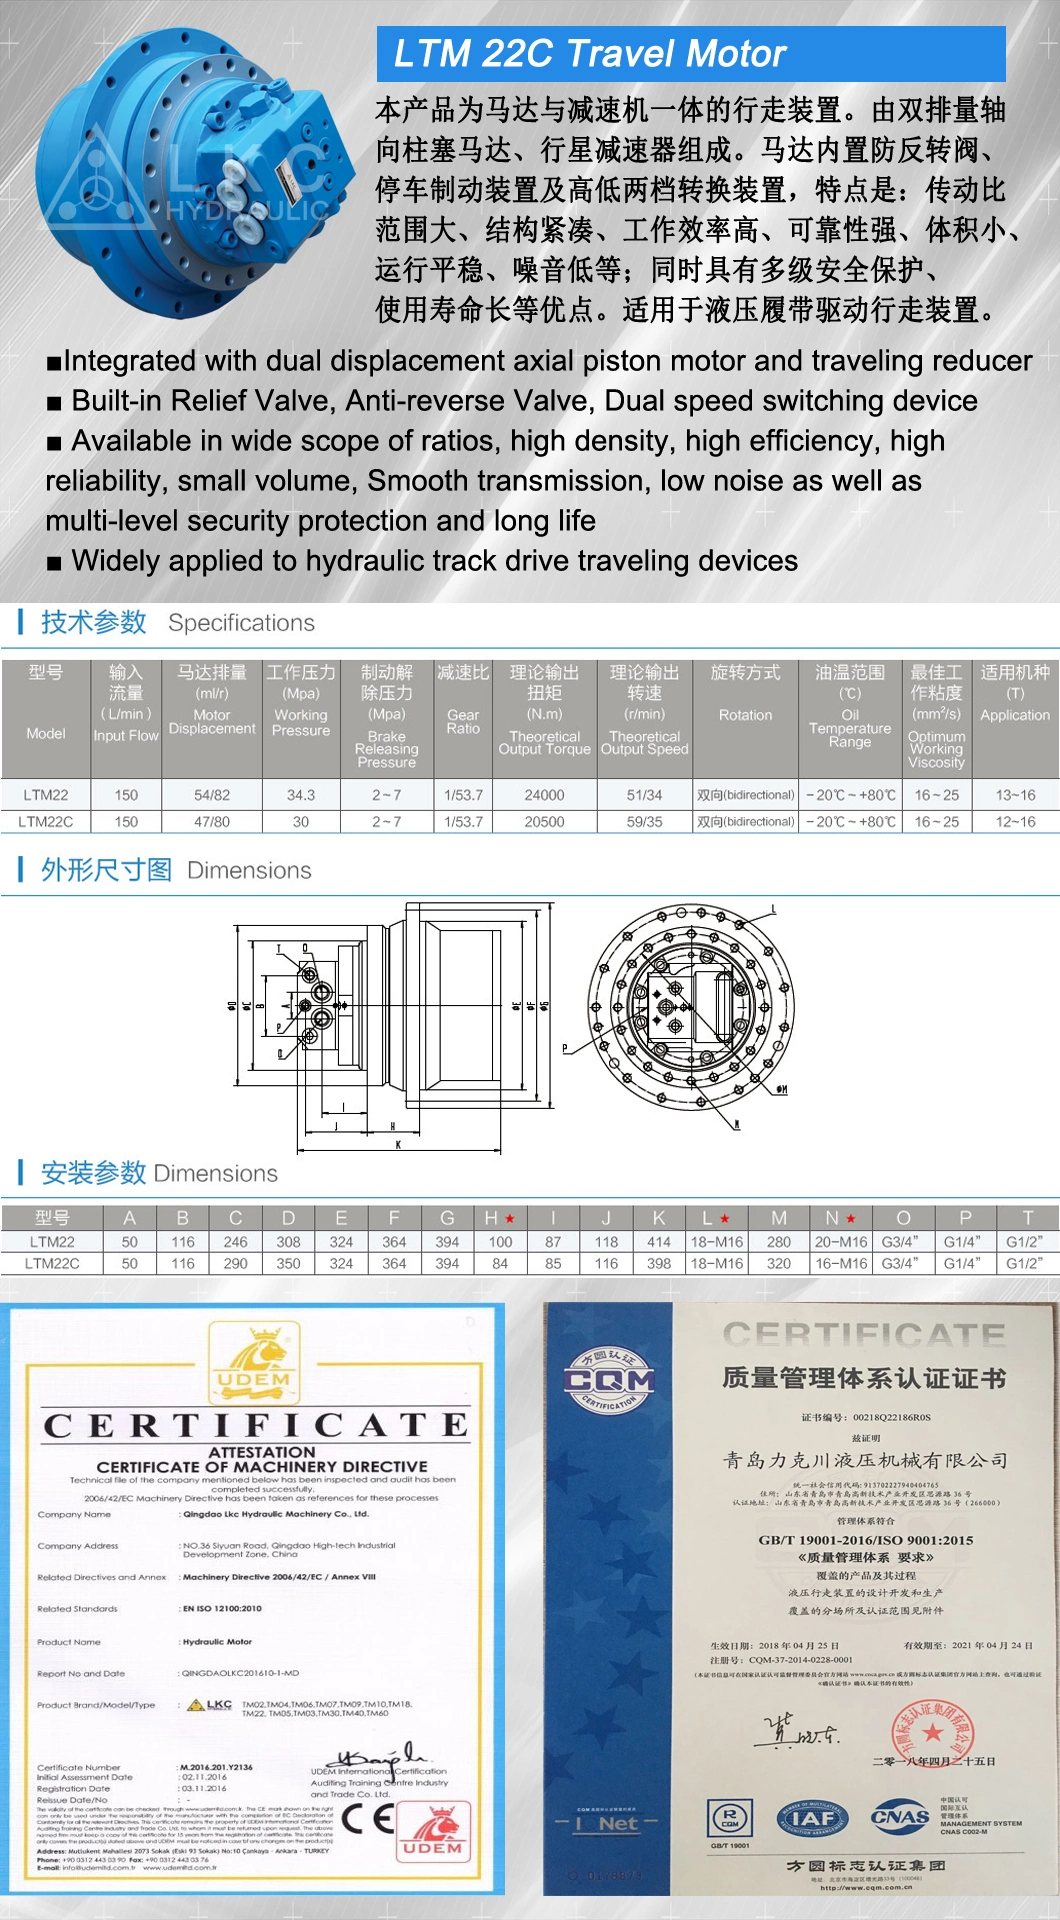 Cat 312 Series Hydraulic Motor Spare Parts for Hydraulic Excavator